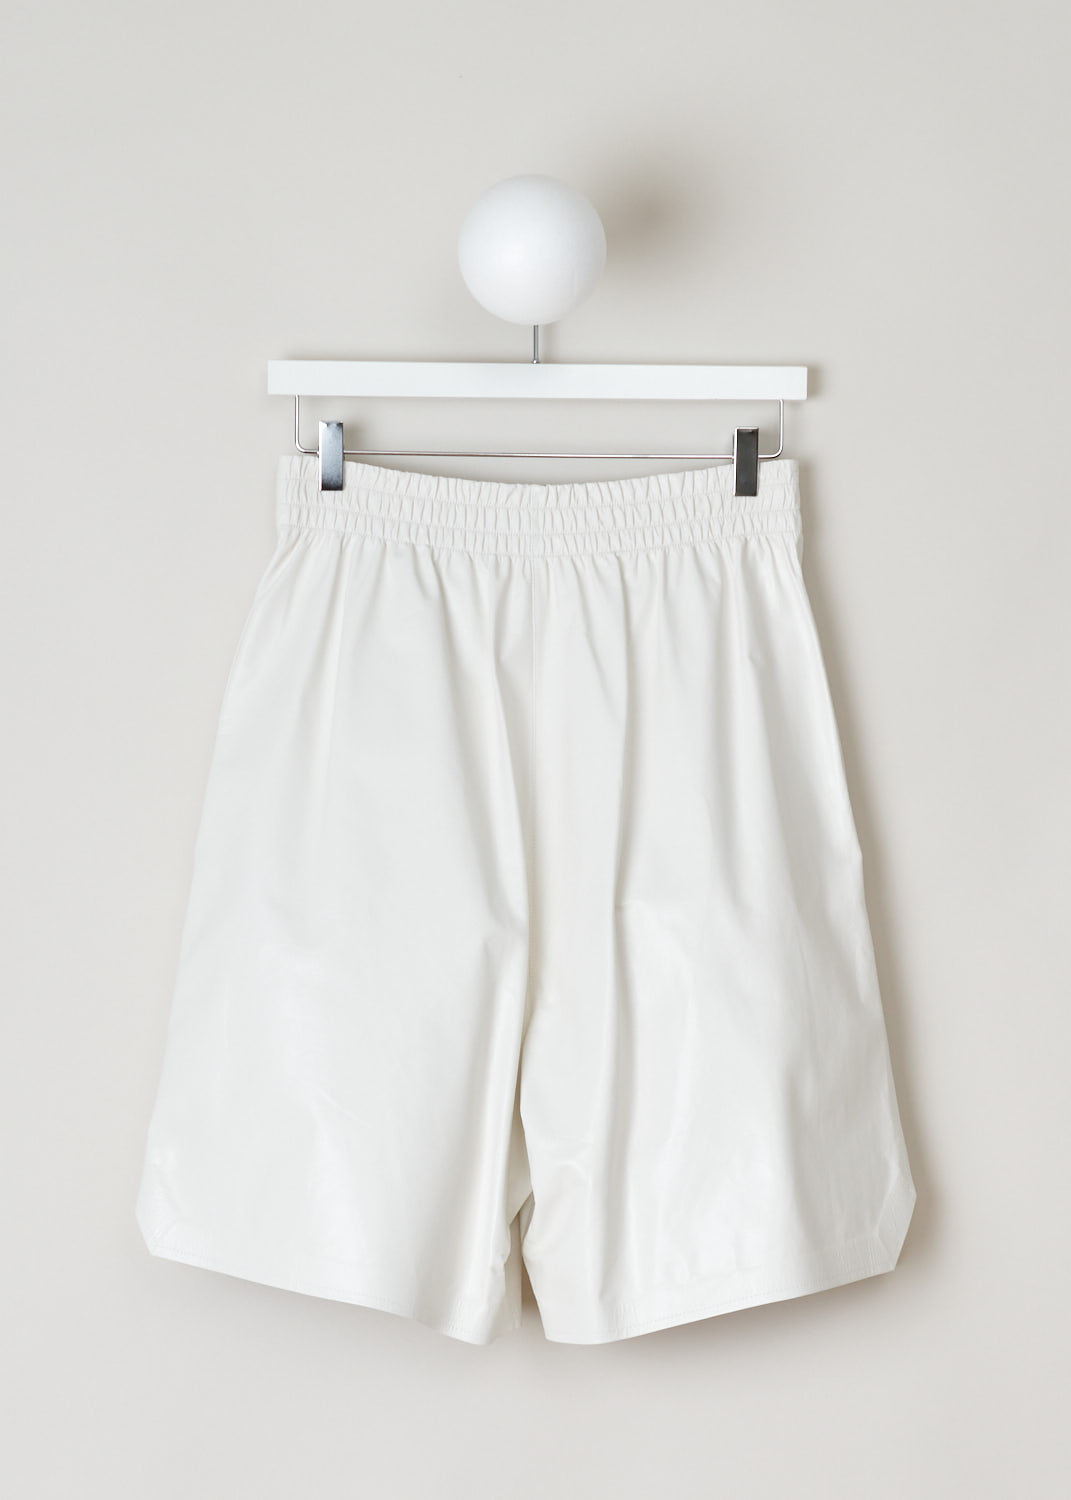 Bottega Veneta, White patent leather shorts, 633445_VKLC0_9068, white, back, these shorts made from white shiny leather. Featuring an oversized fit with the slip-in pockets being on the side seam, the elastic waistband acts as you fastening method on this model. 